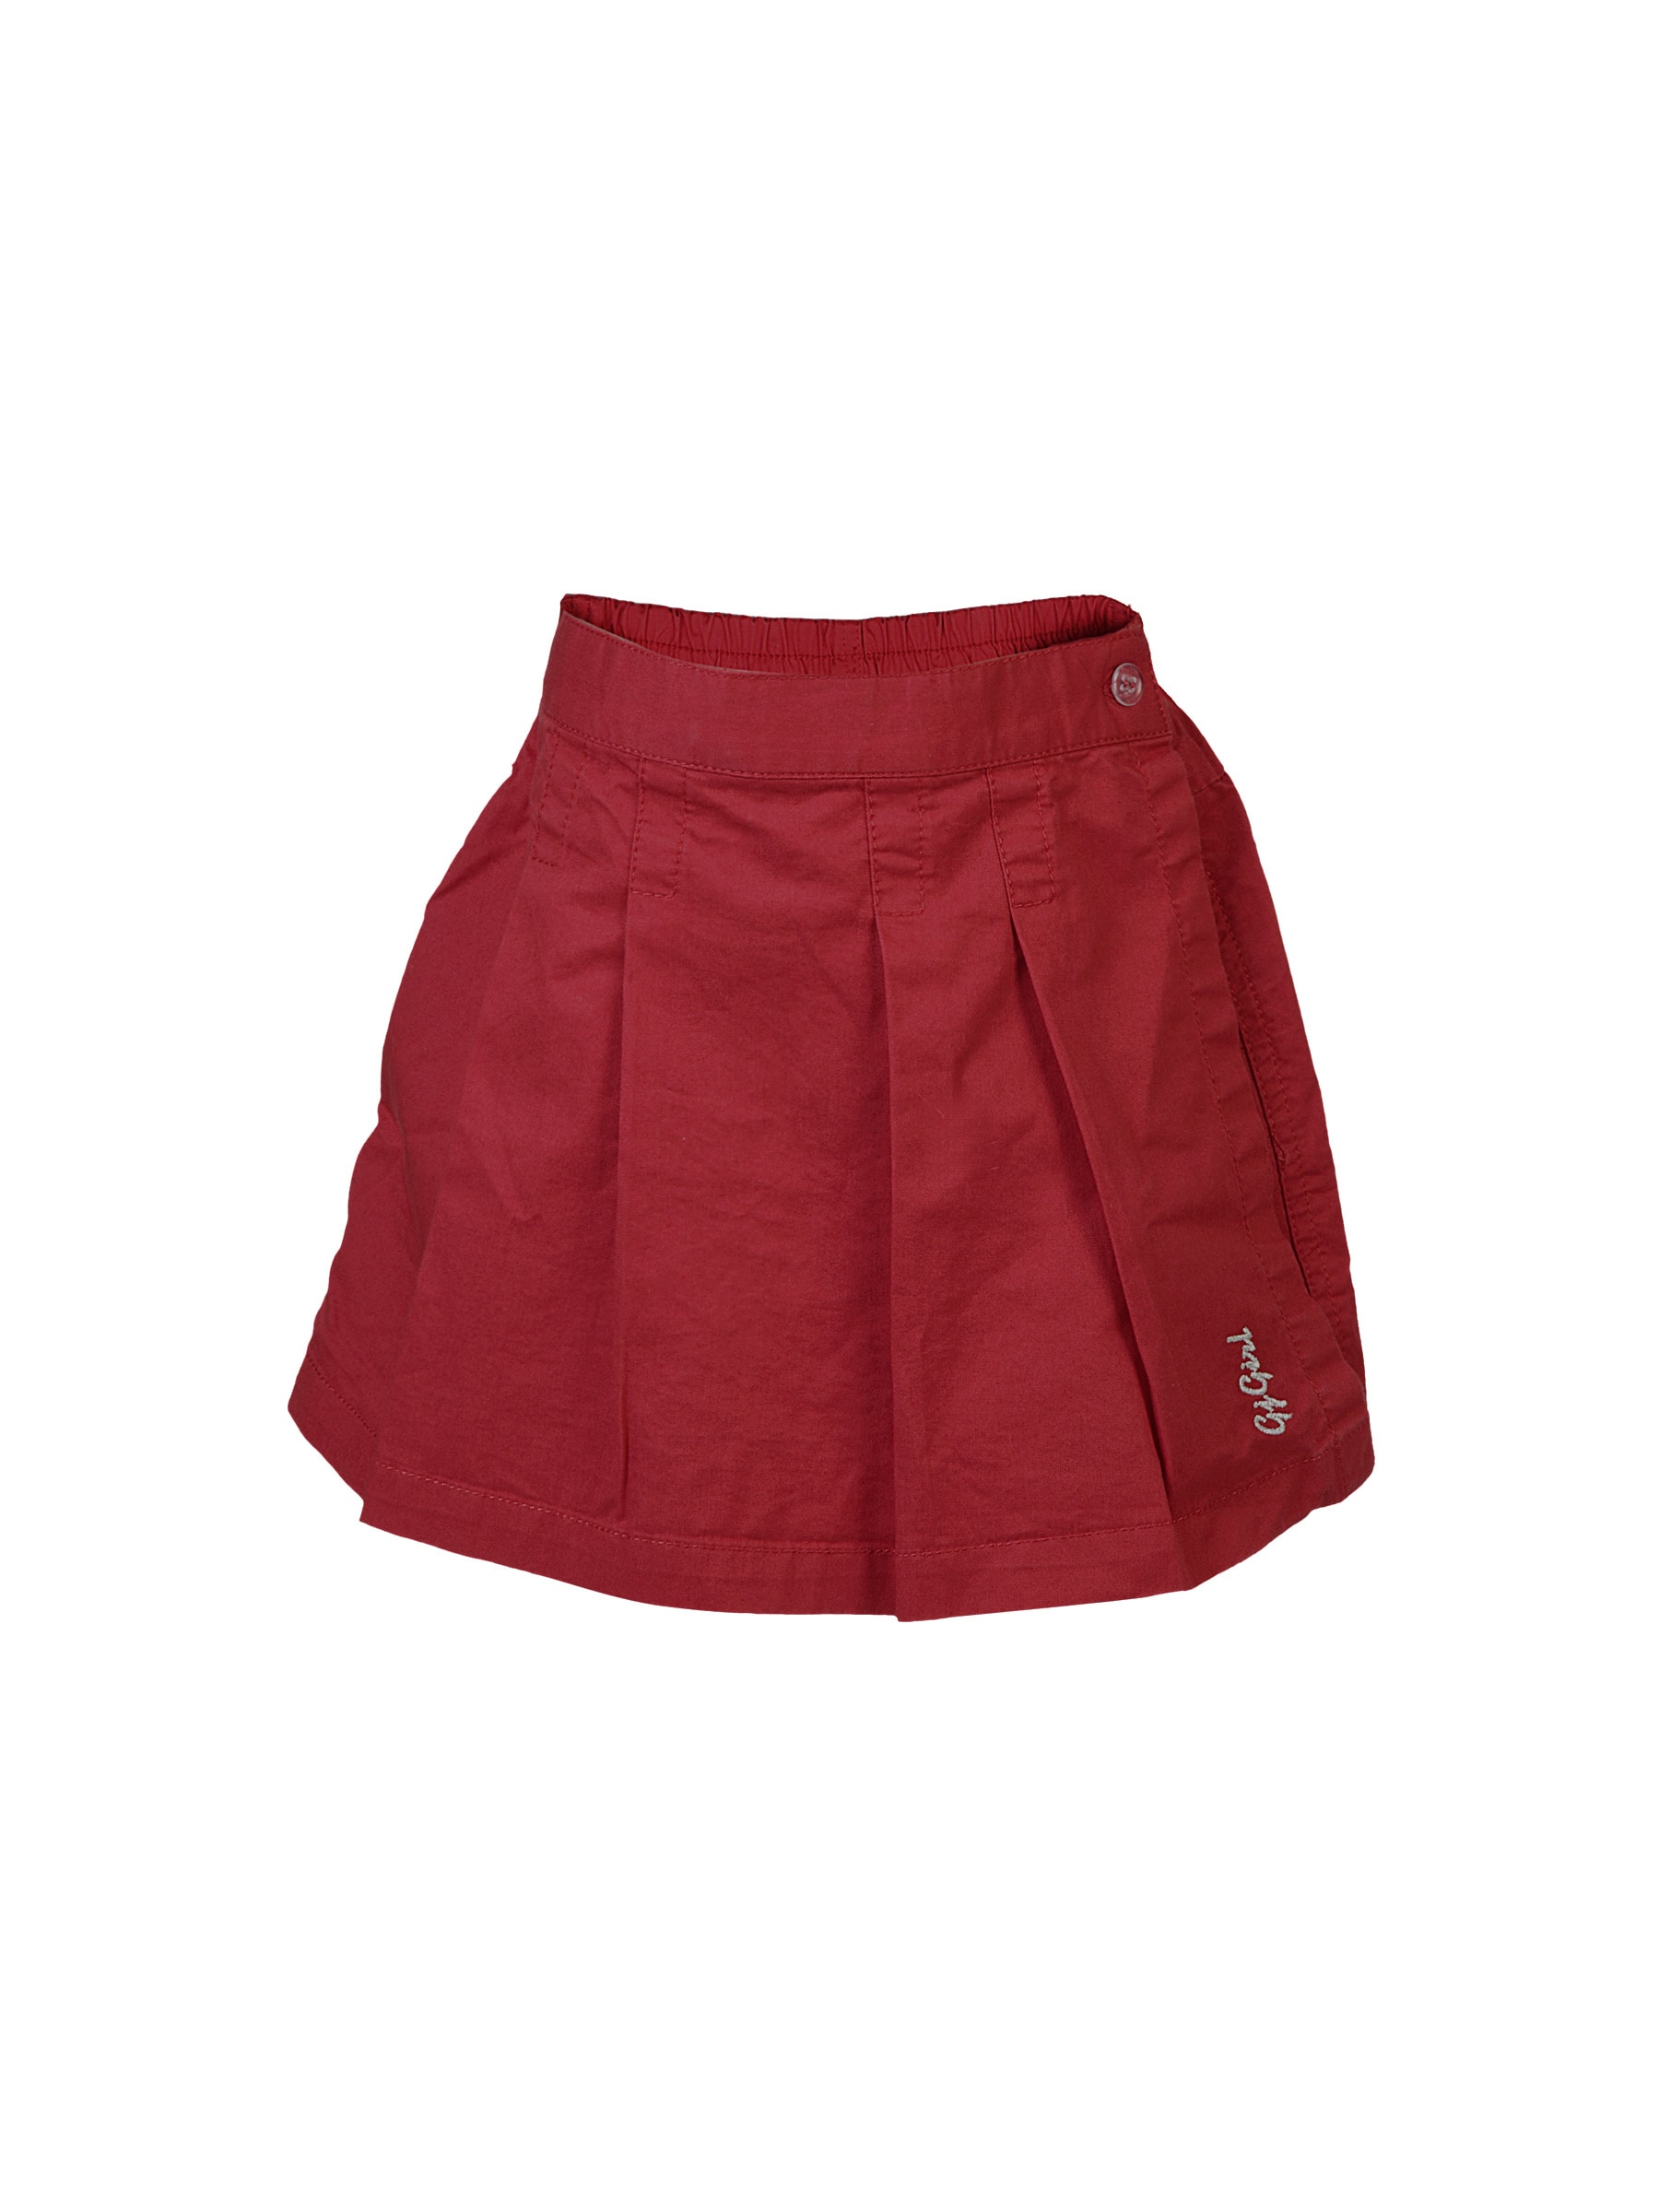 Gini and Jony Kids Girls Solid Red Skirts